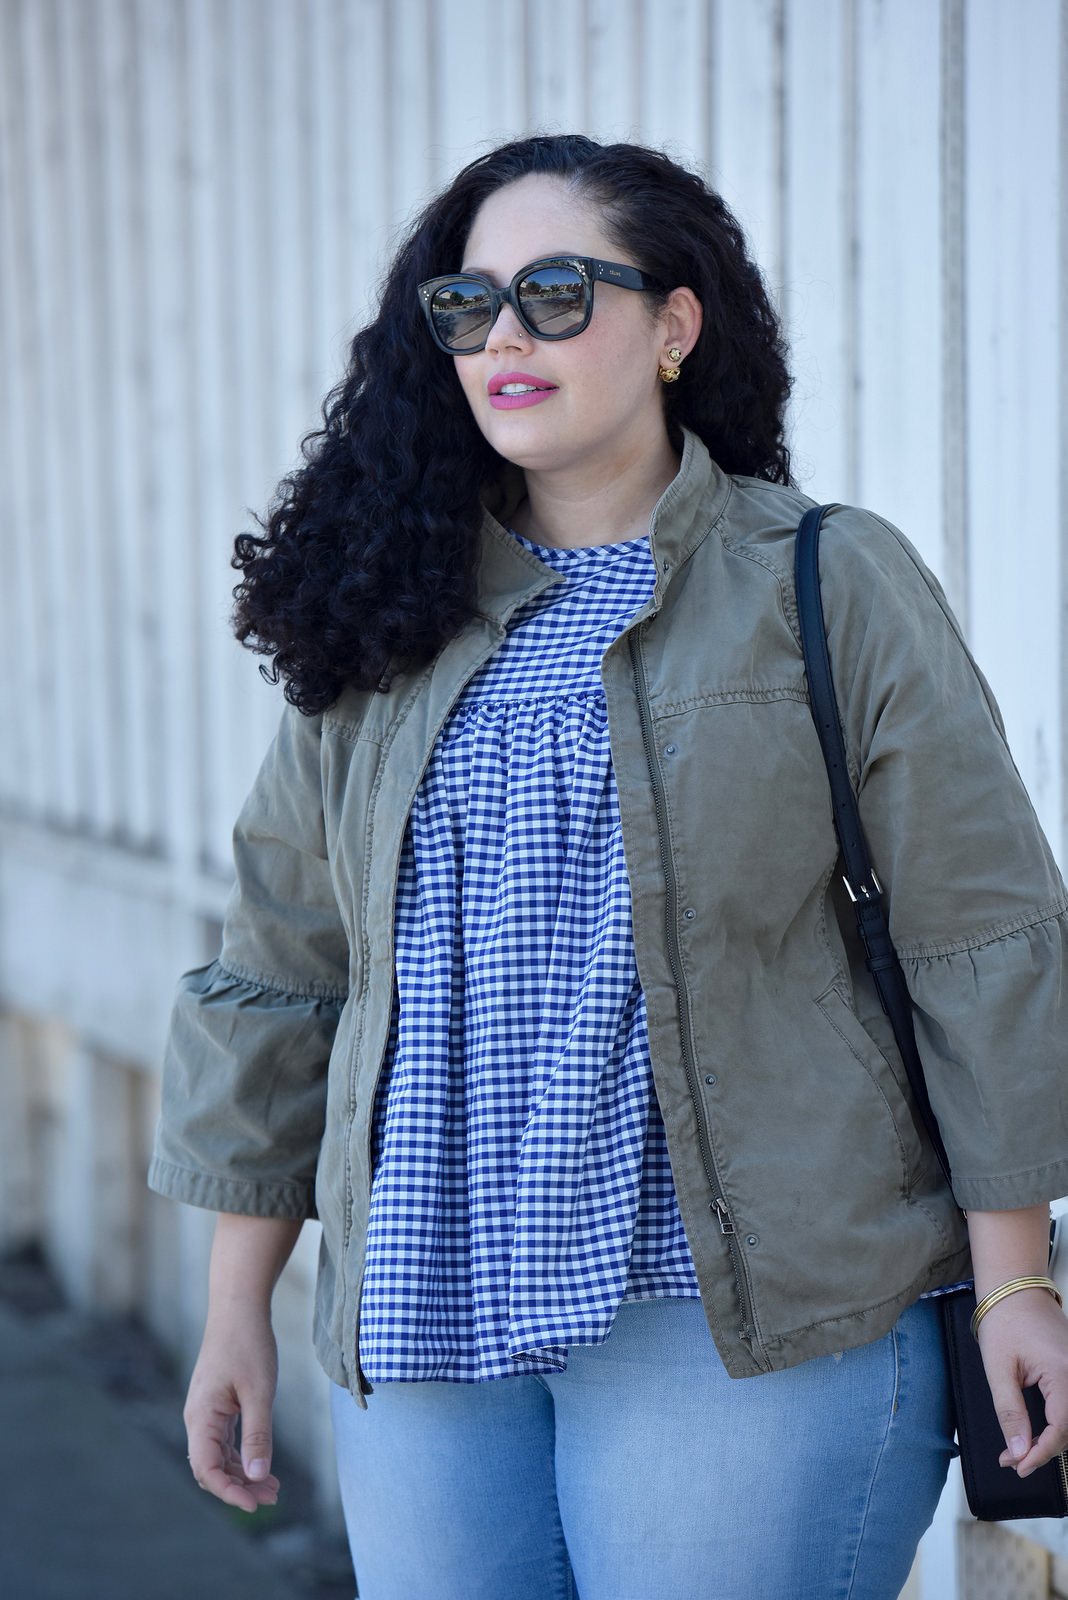 How to make Gingham Wearable for Everyday